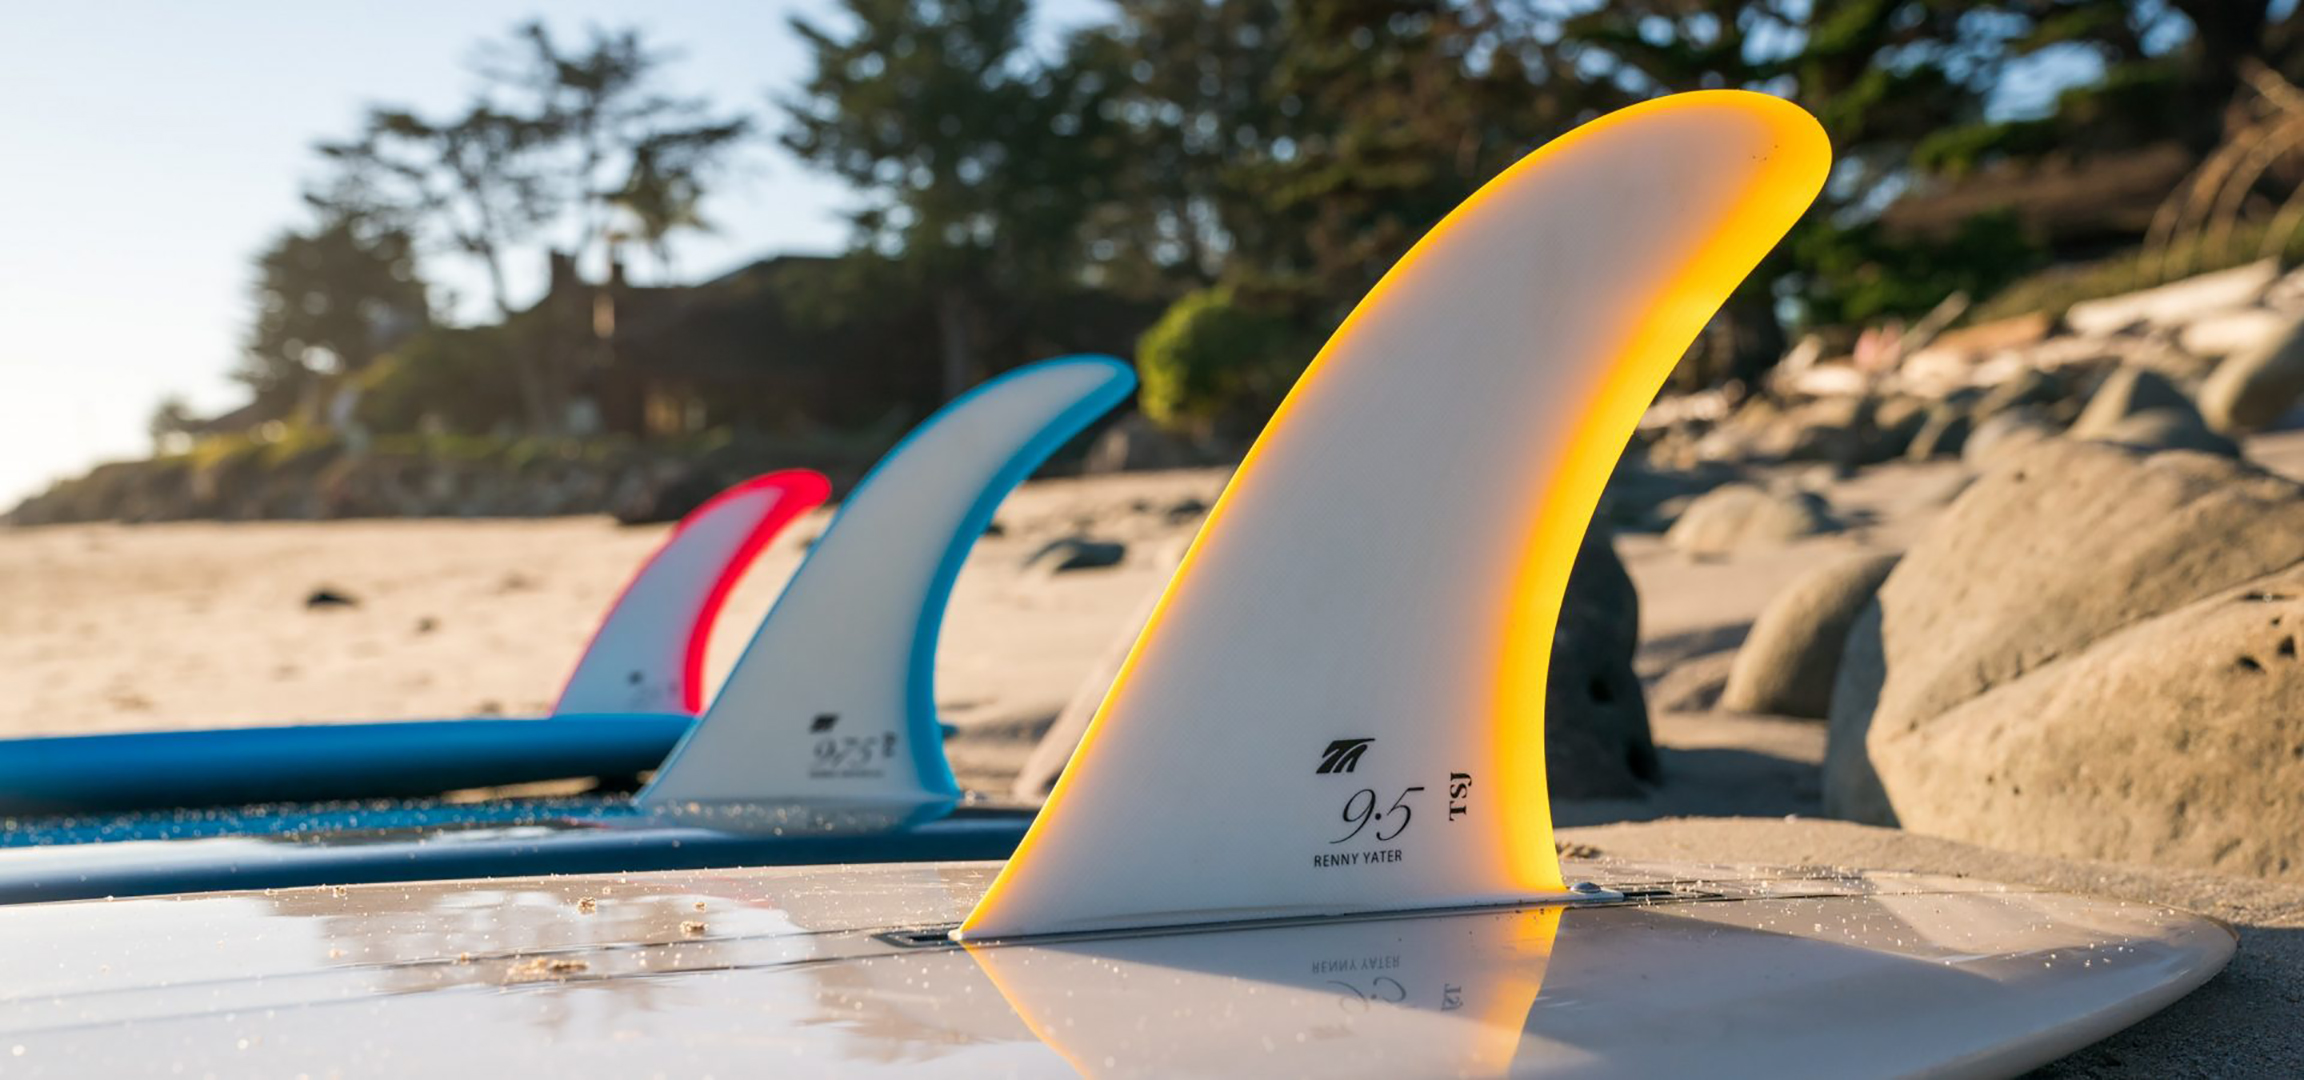 Surfboard Fins For Riding Different Kinds Of Waves And Surfs Play An Important Role